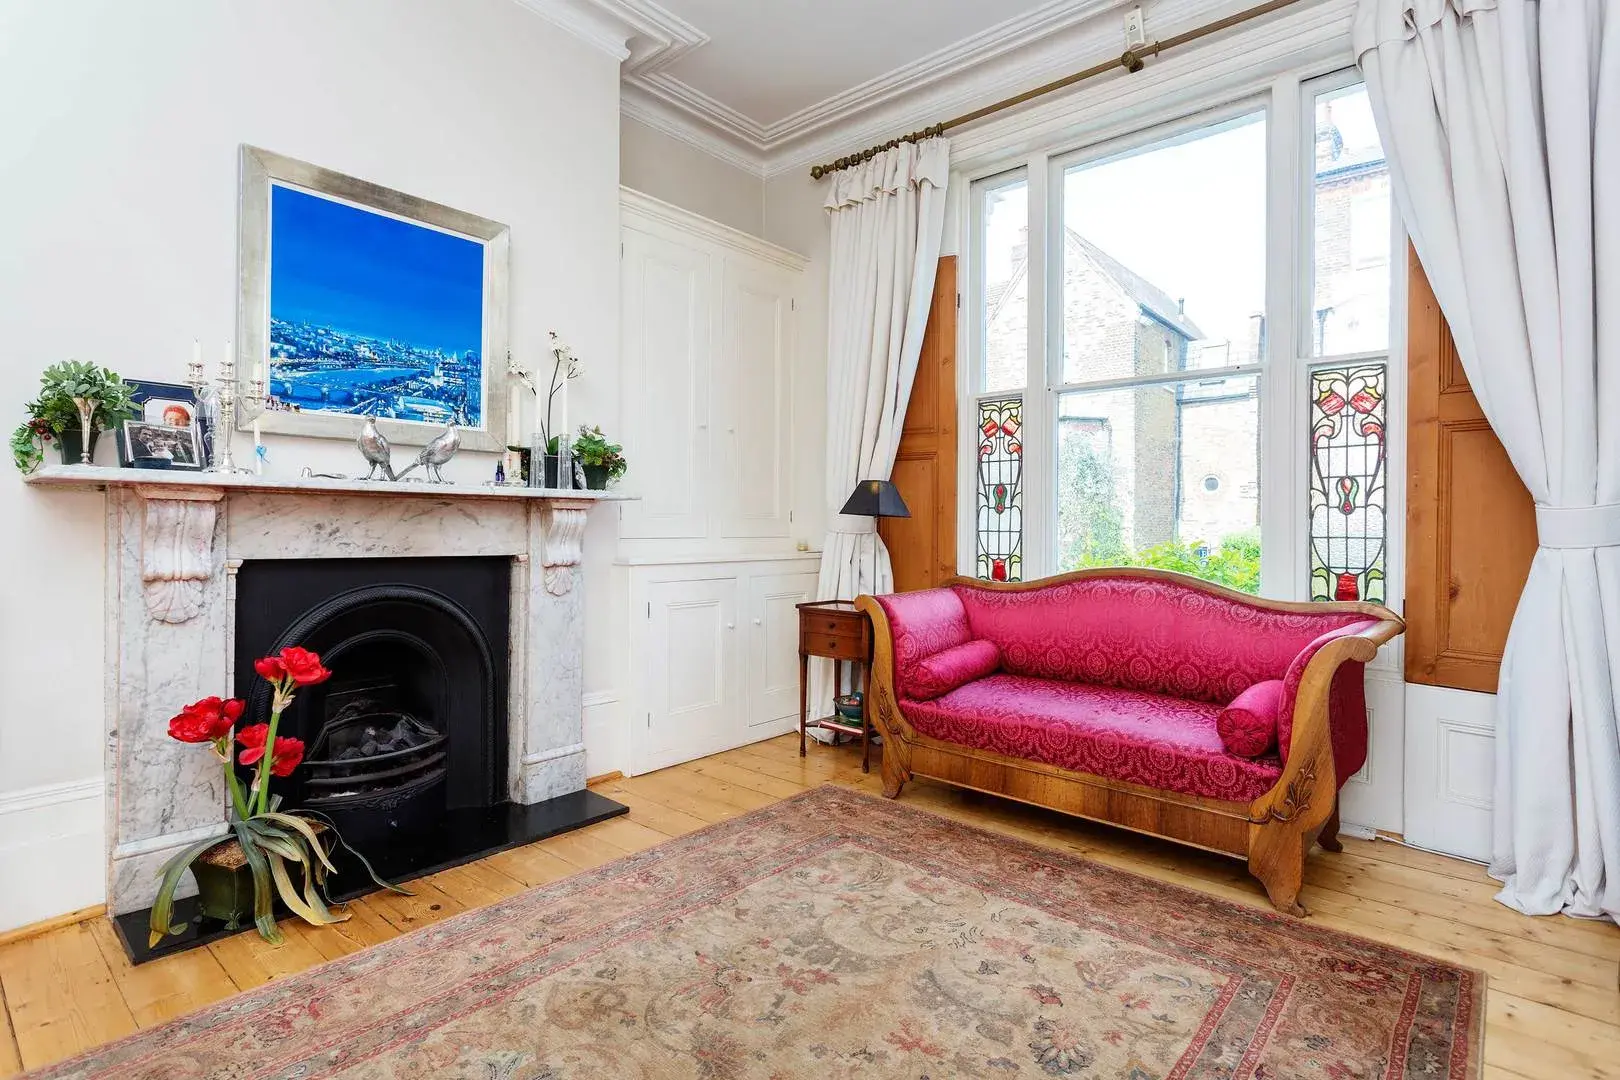 Chetwynd Road, holiday home in London